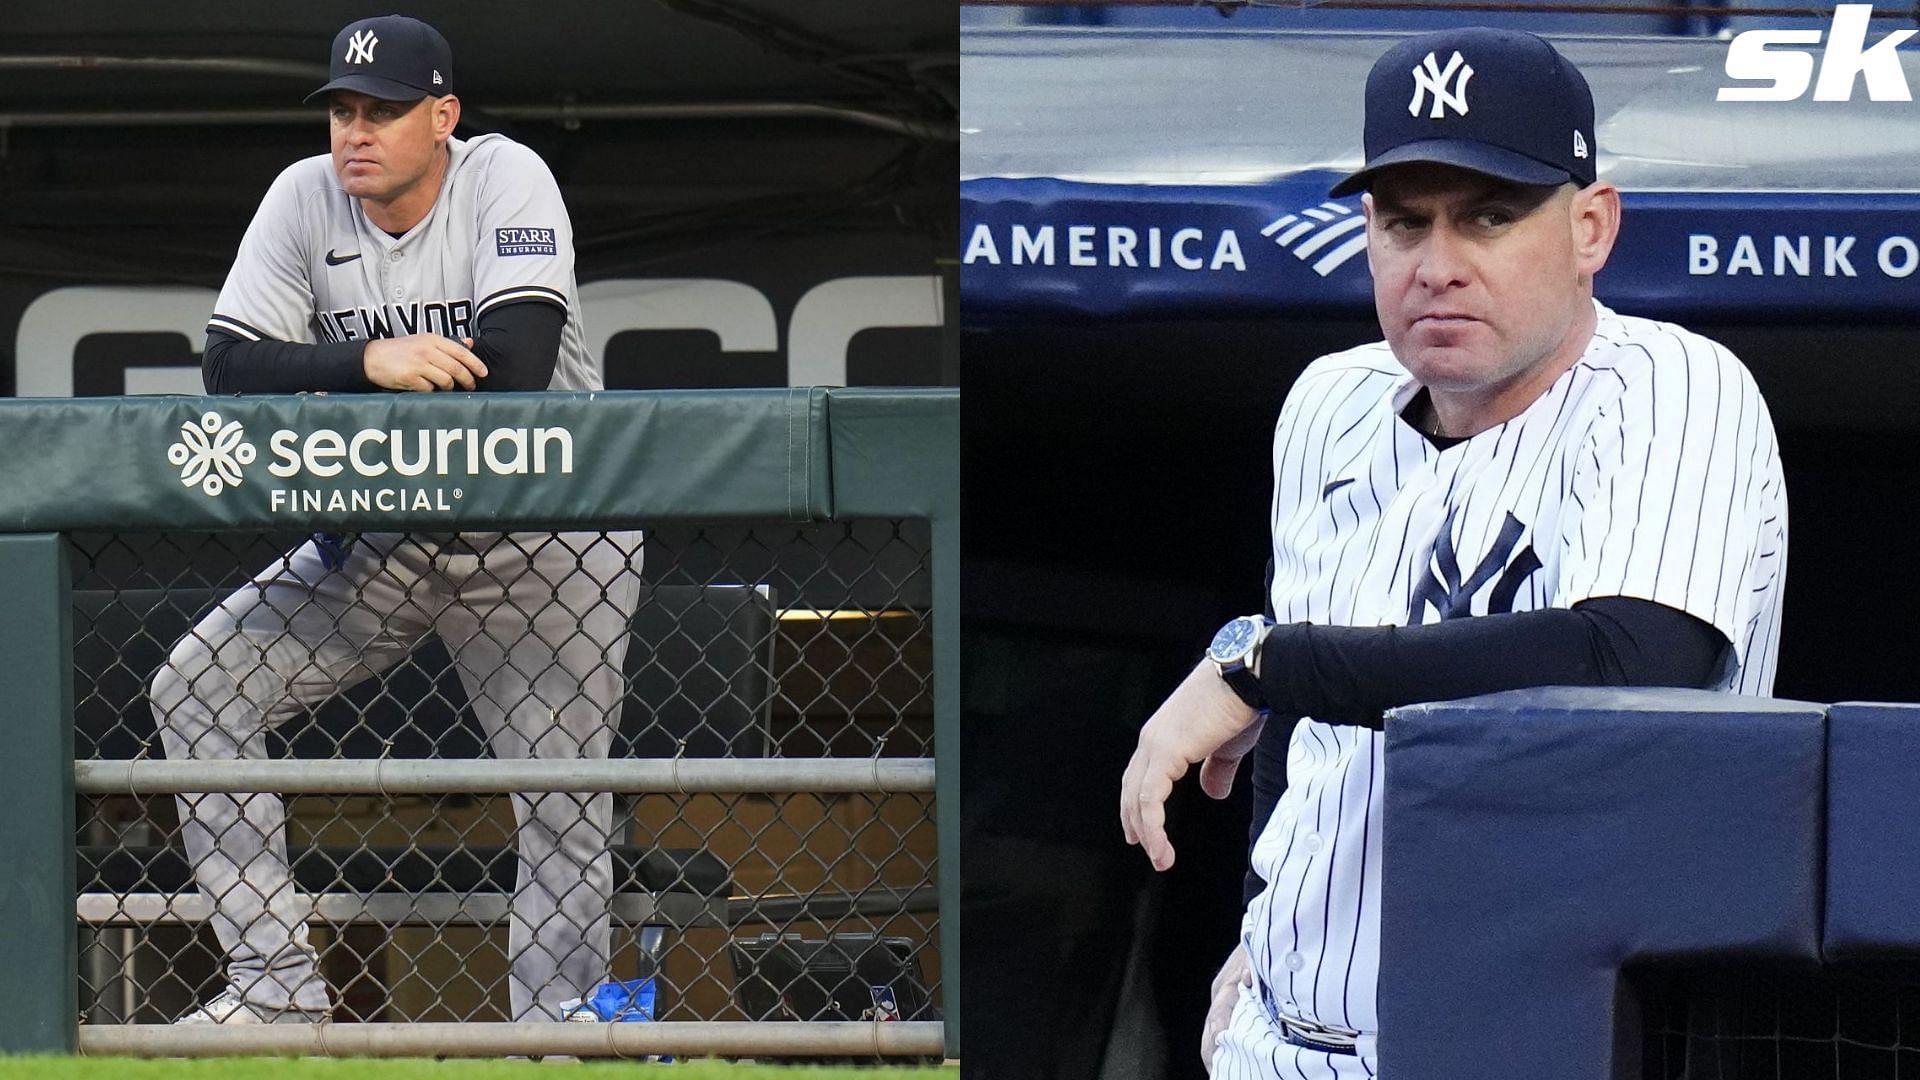 New Mets manager Carlos Mendoza makes bold statement, reigniting age-old rivalry with Yankees